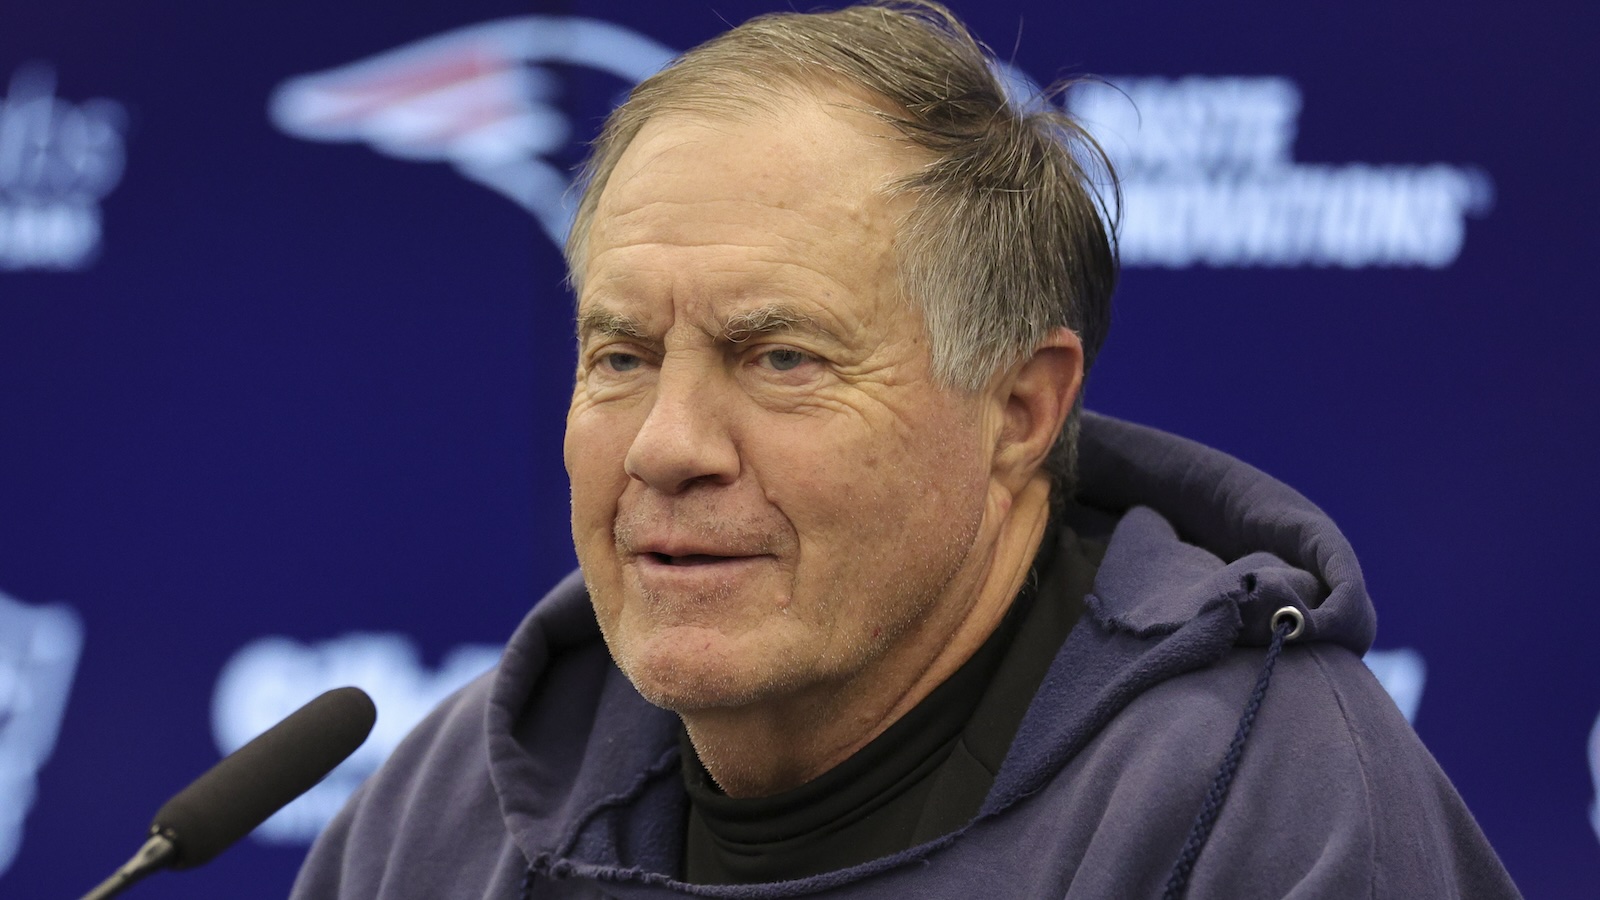  Bill Belichick's Next Move Eyeing Coaching Opportunities with NFC East Giants